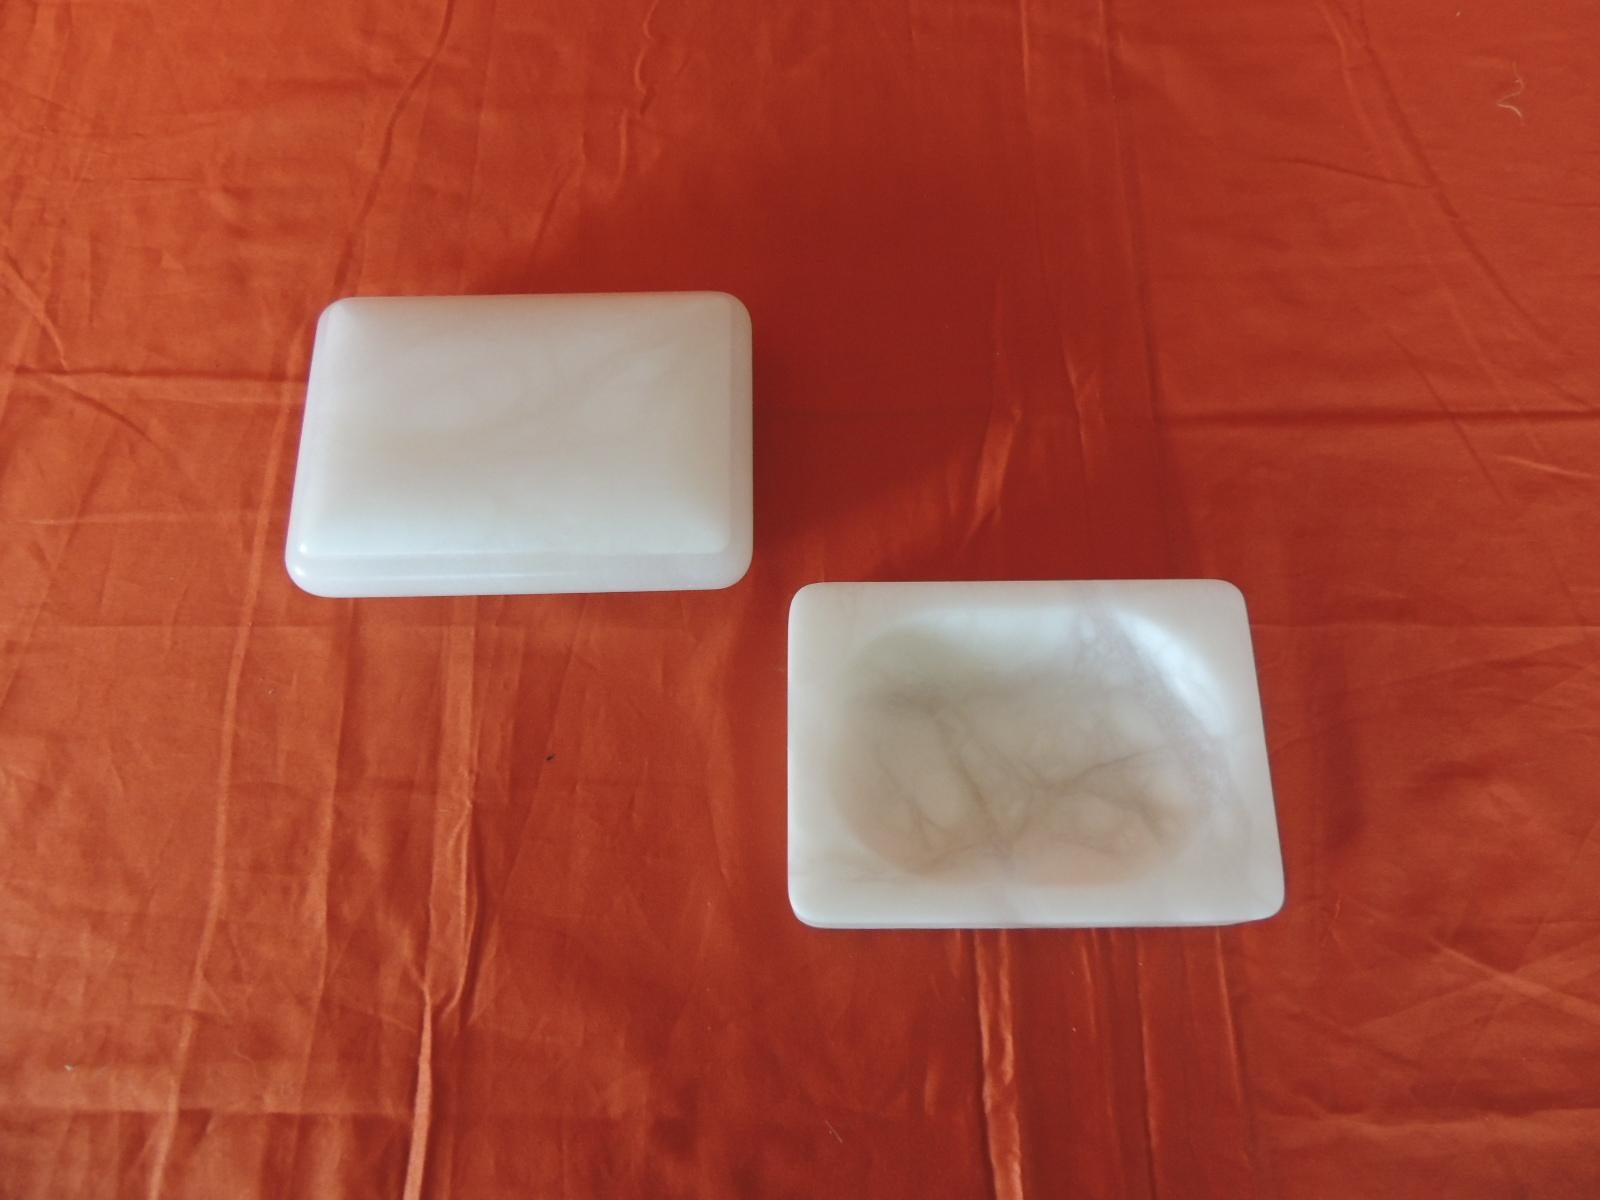 Hand carved set of covered box and soap dish Italian Alabaster decorative accessories.
These pieces could be use in the bathroom or on a vanity table.
